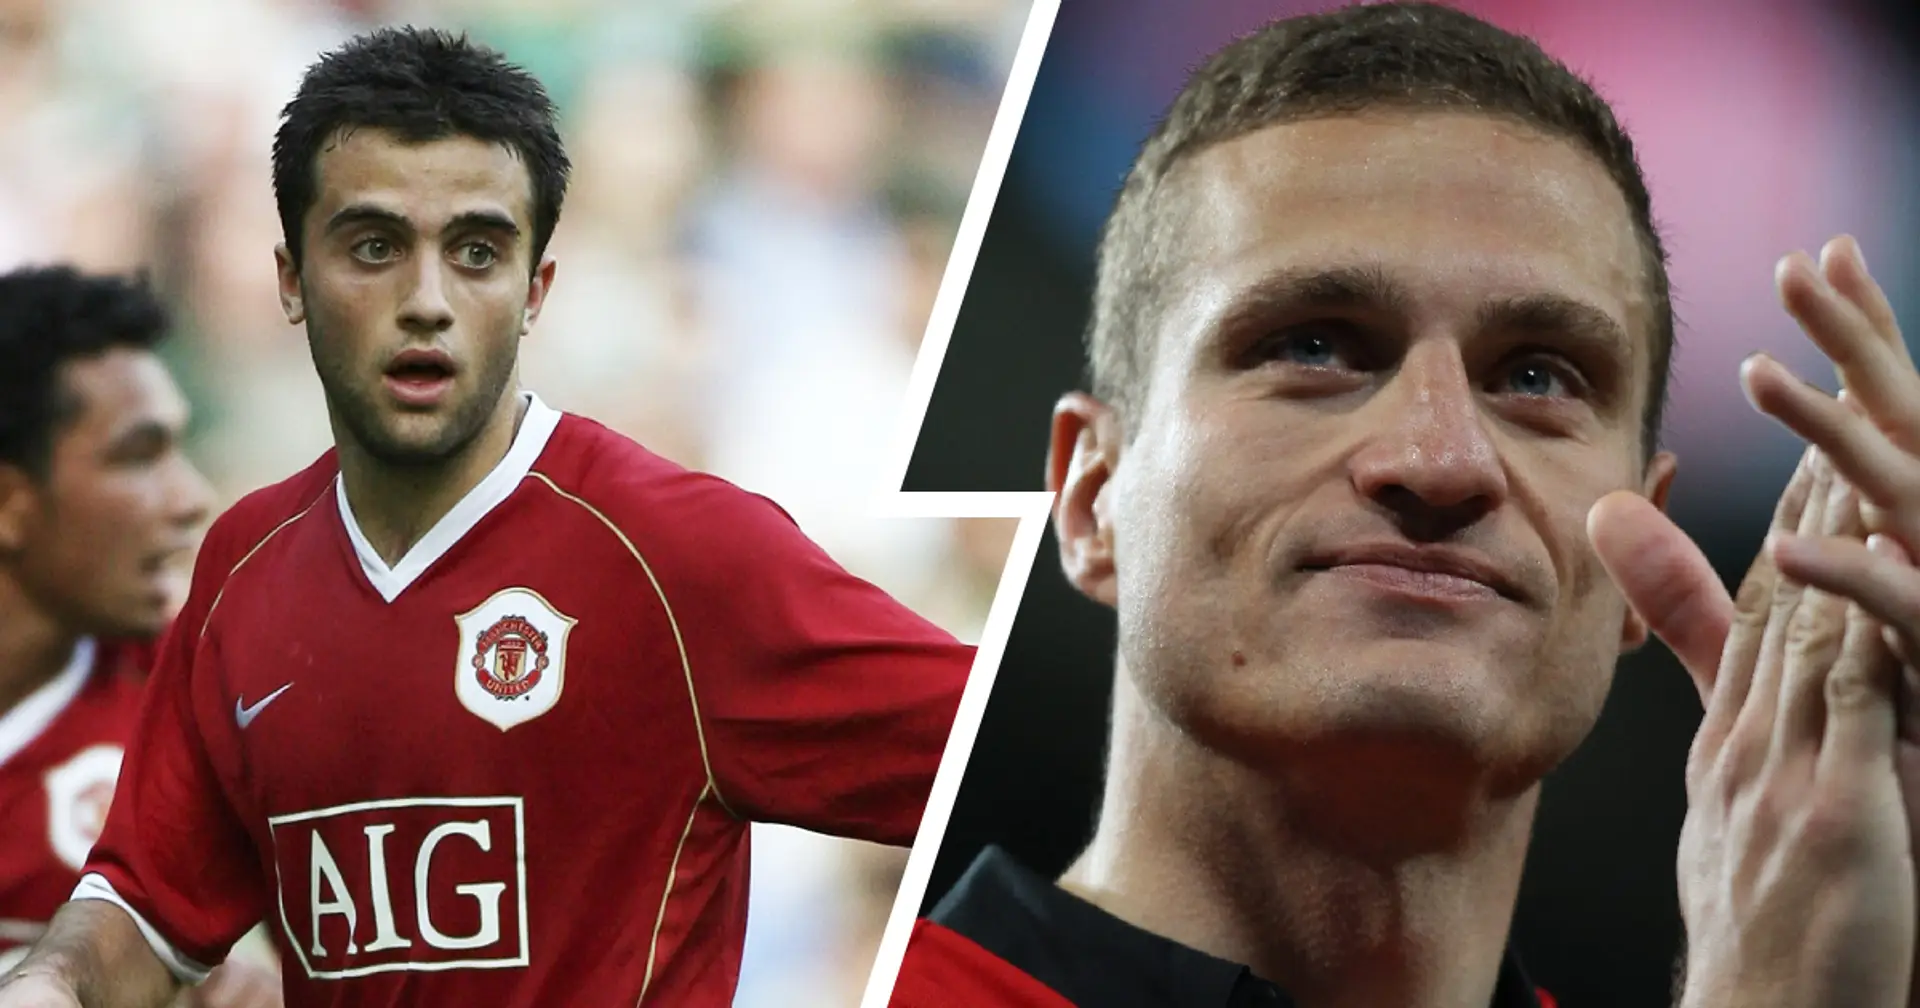 'Nemanja told me I deserved it more than him': One big gesture Vidic made to Guiseppe Rossi